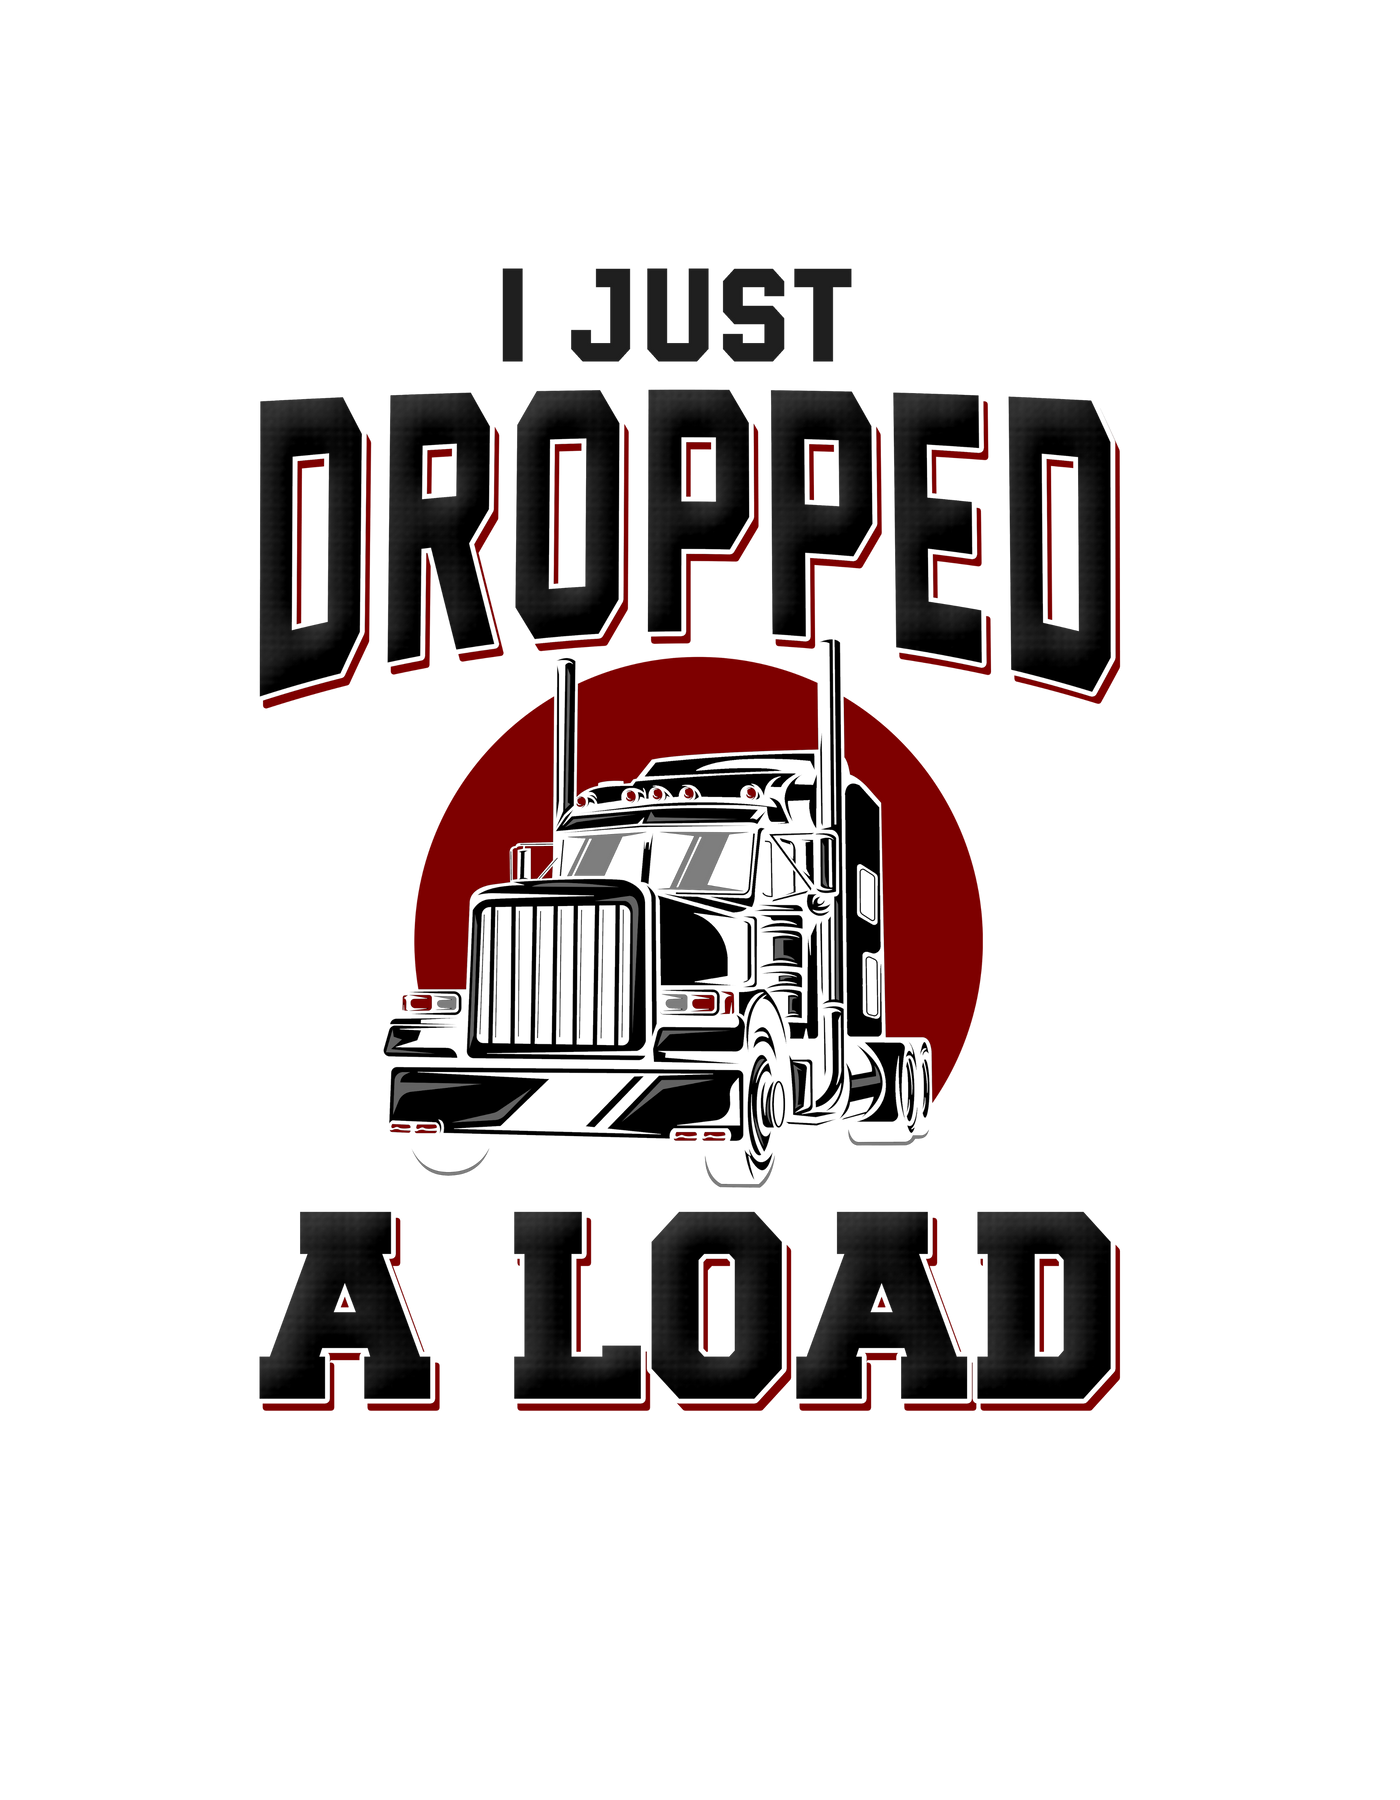 I Just Dropped a Load Trucker Tee